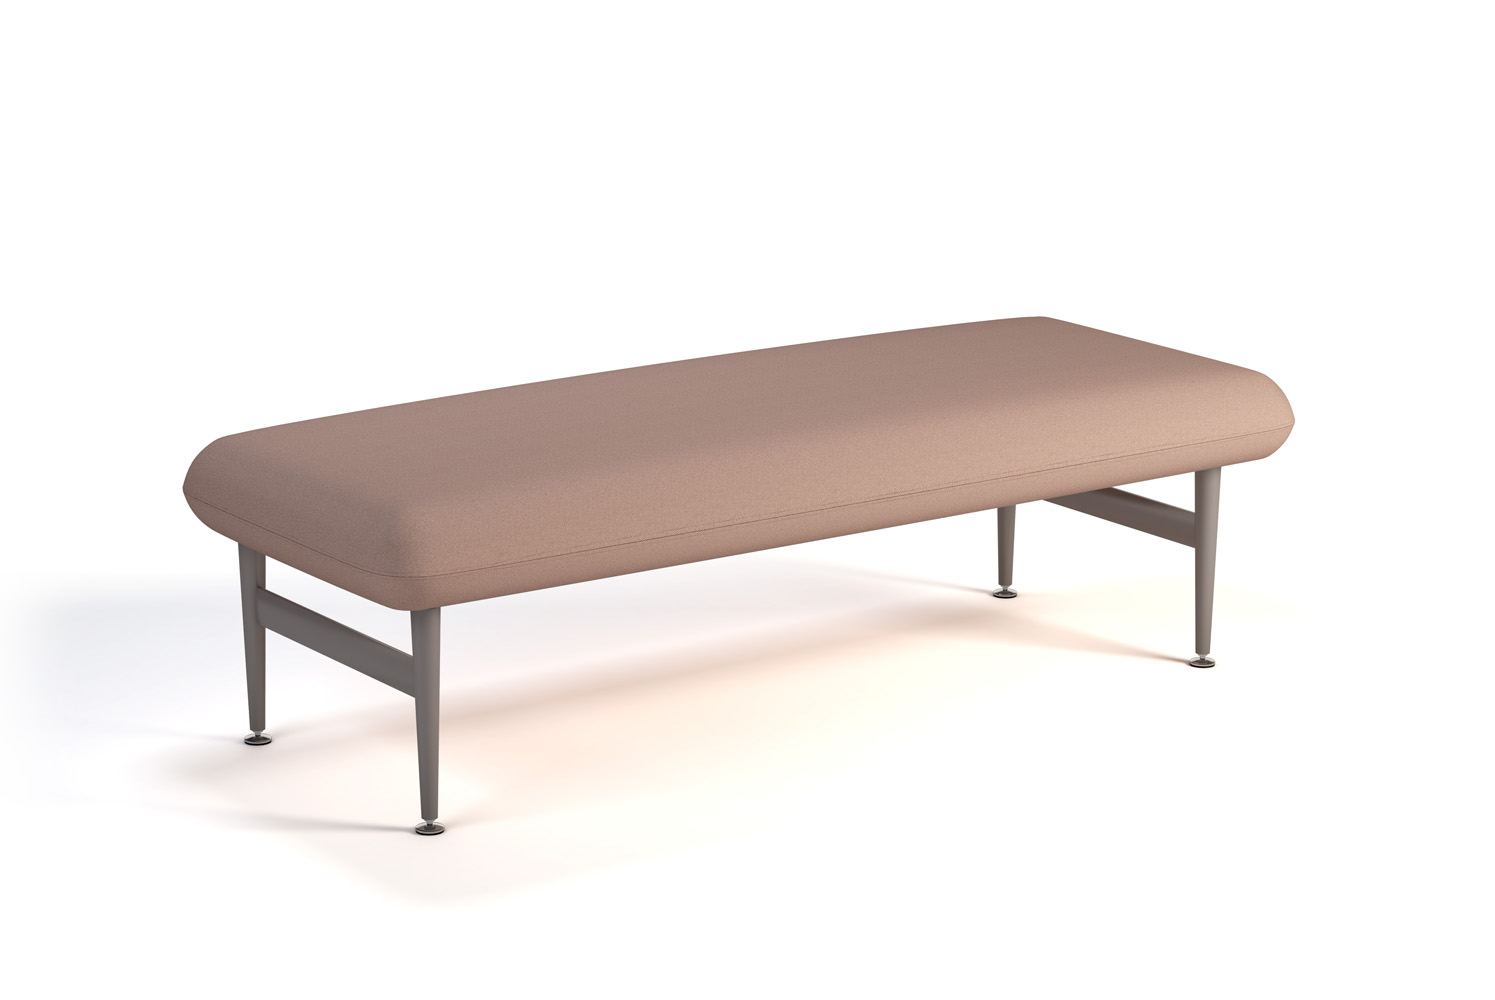 Nikki 60 in Two Seat Straight Bench